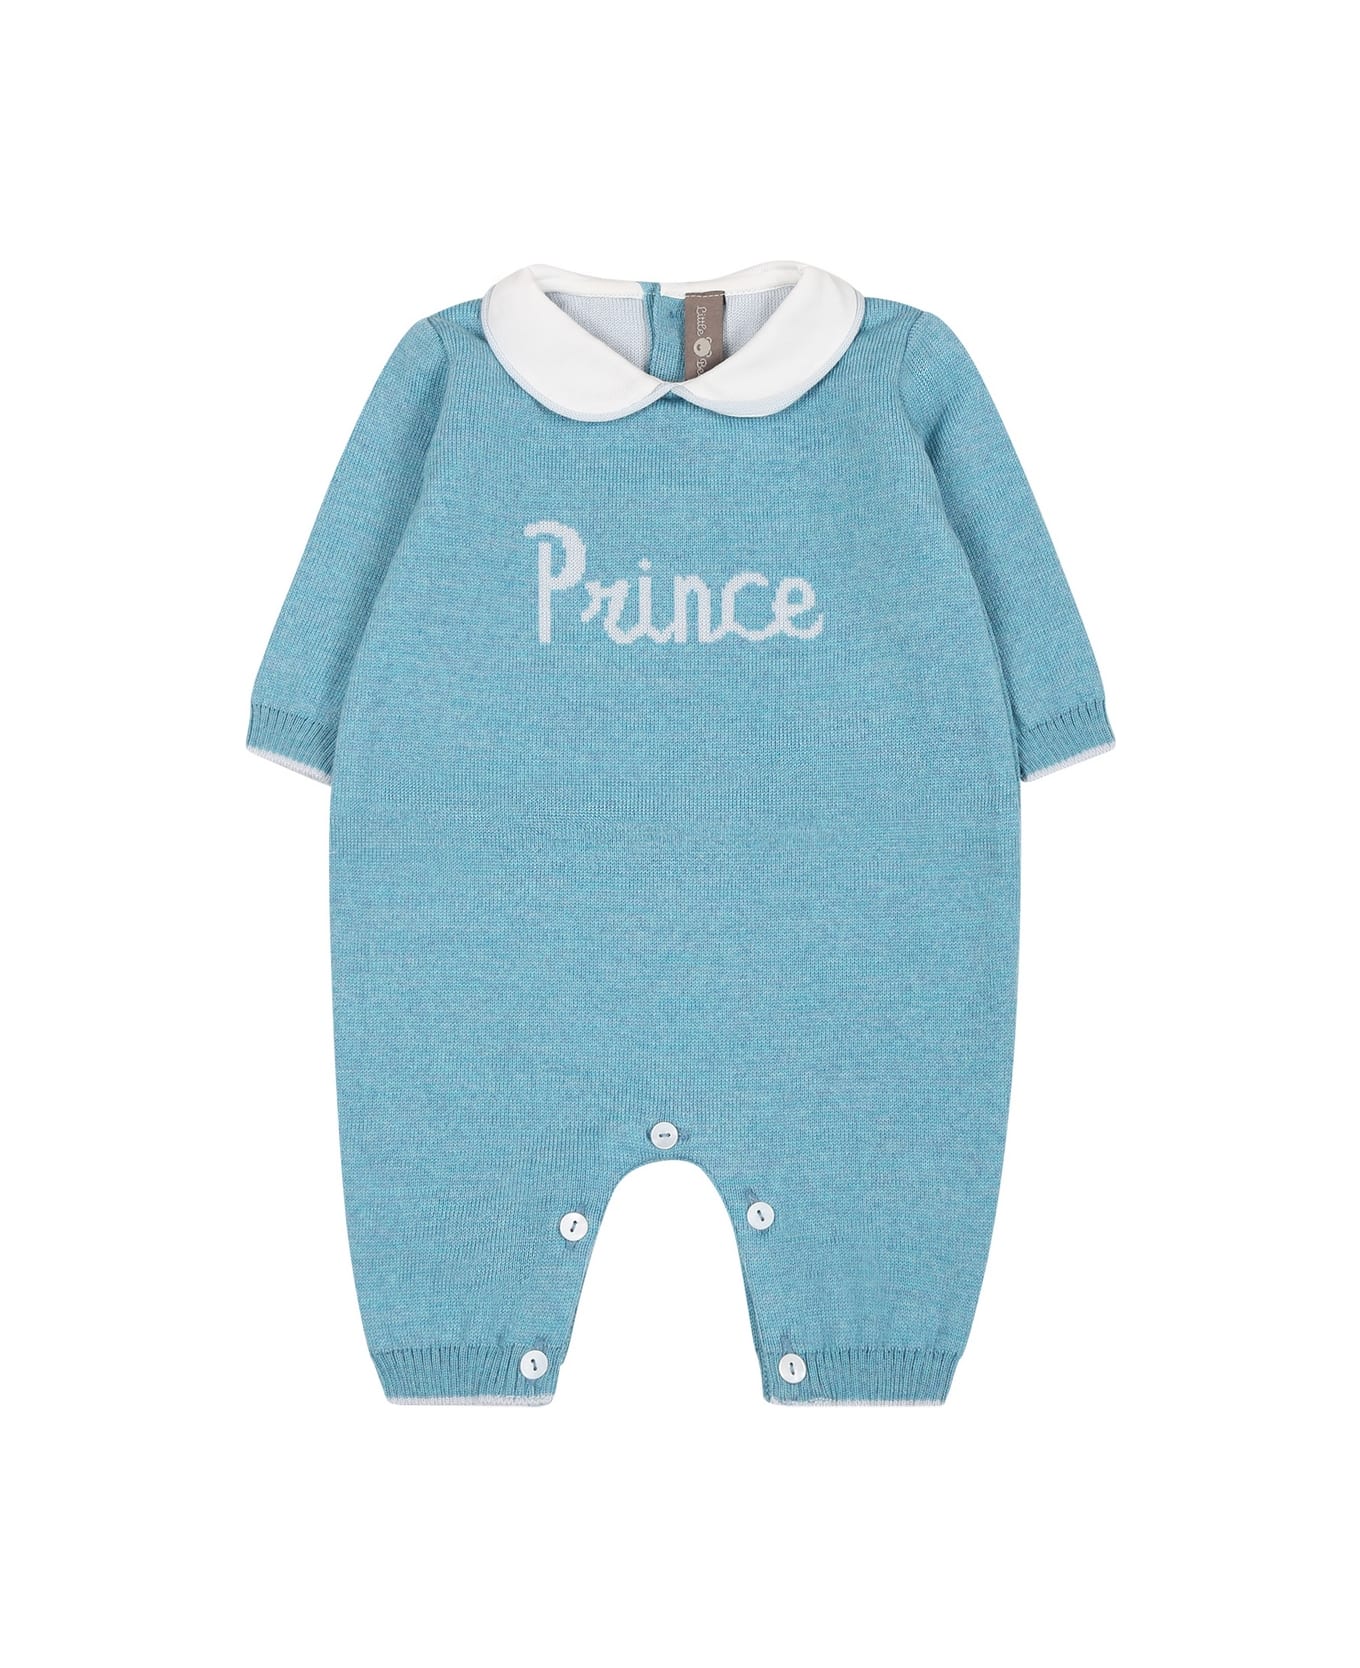 Little Bear Light Blue Babygrown For Baby Boy With Embroidered "prince" Writing - Light Blue